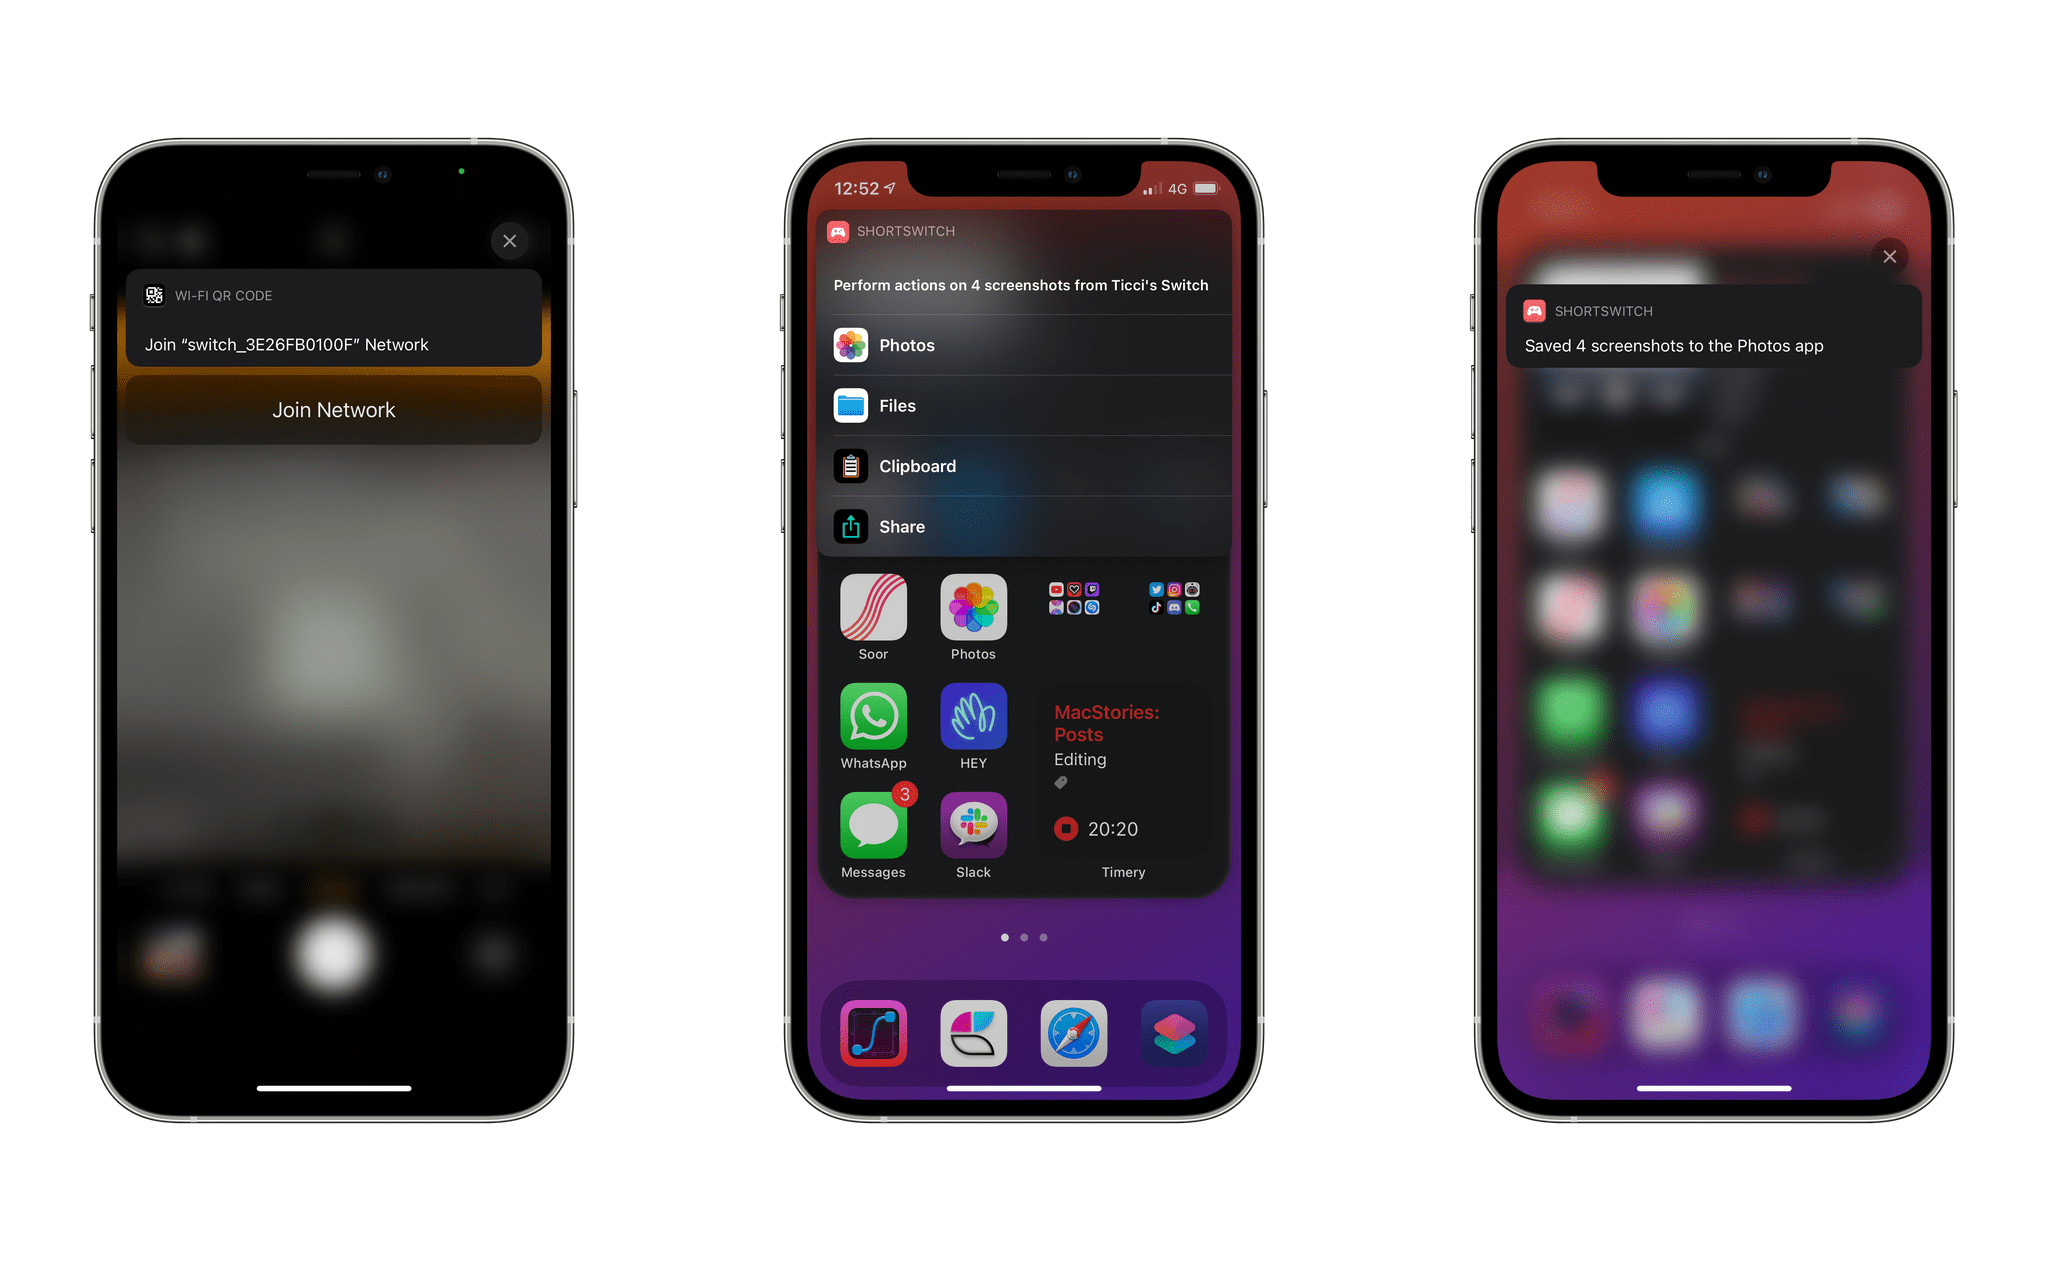 ShortSwitch for iOS 14.